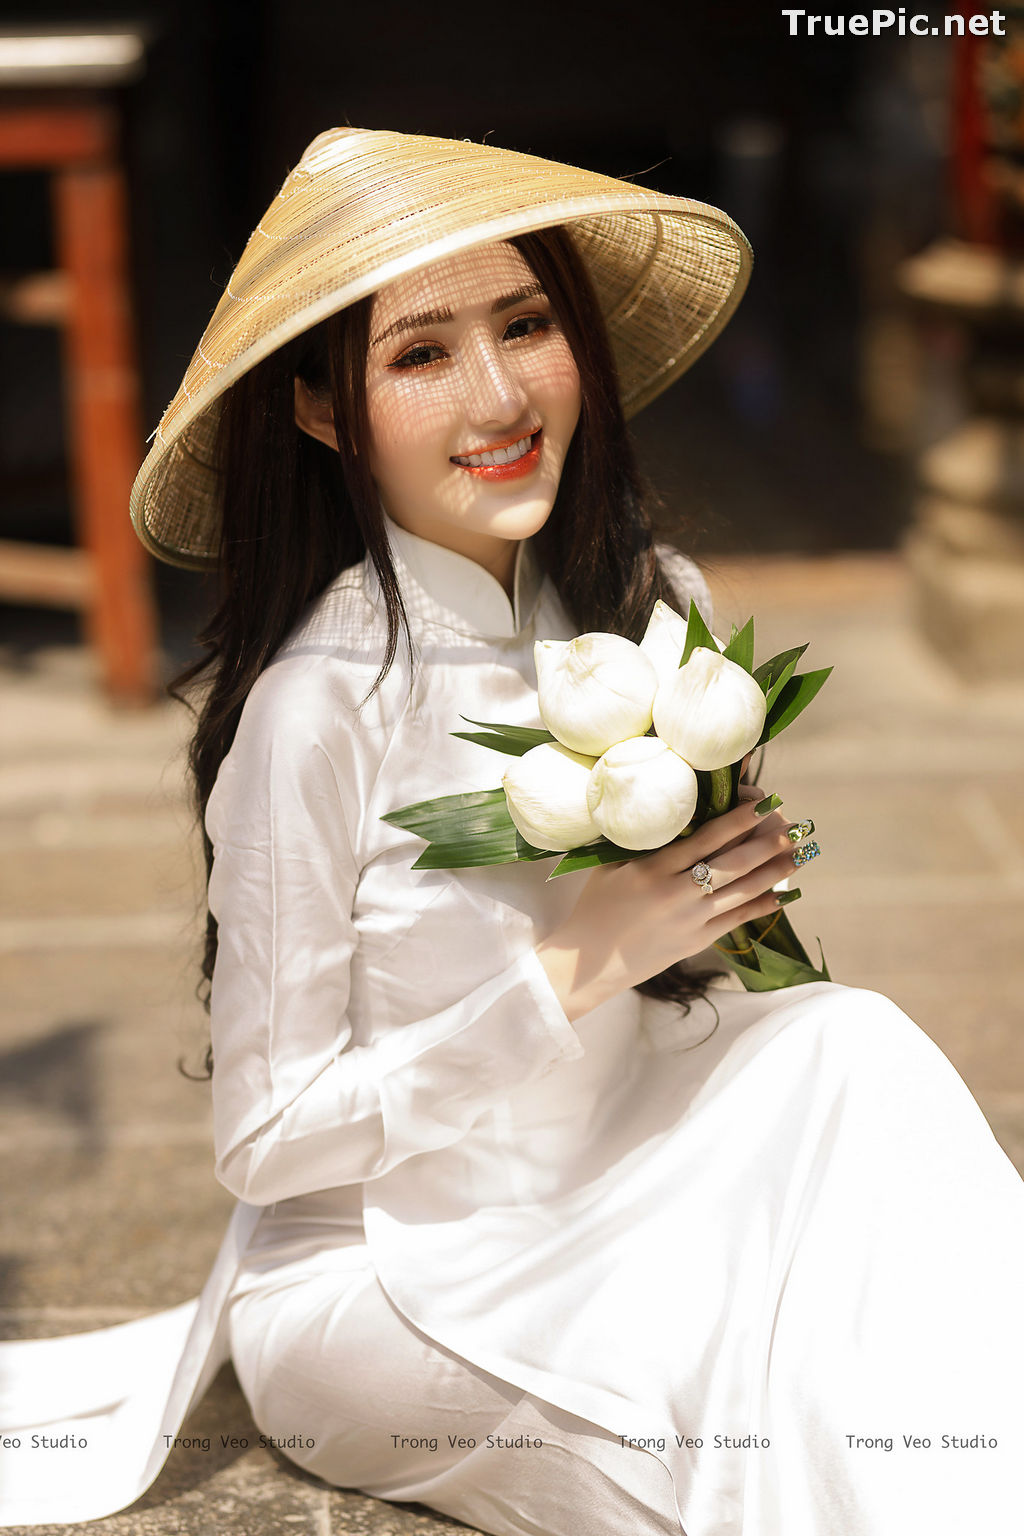 Image The Beauty of Vietnamese Girls with Traditional Dress (Ao Dai) #2 - TruePic.net - Picture-23